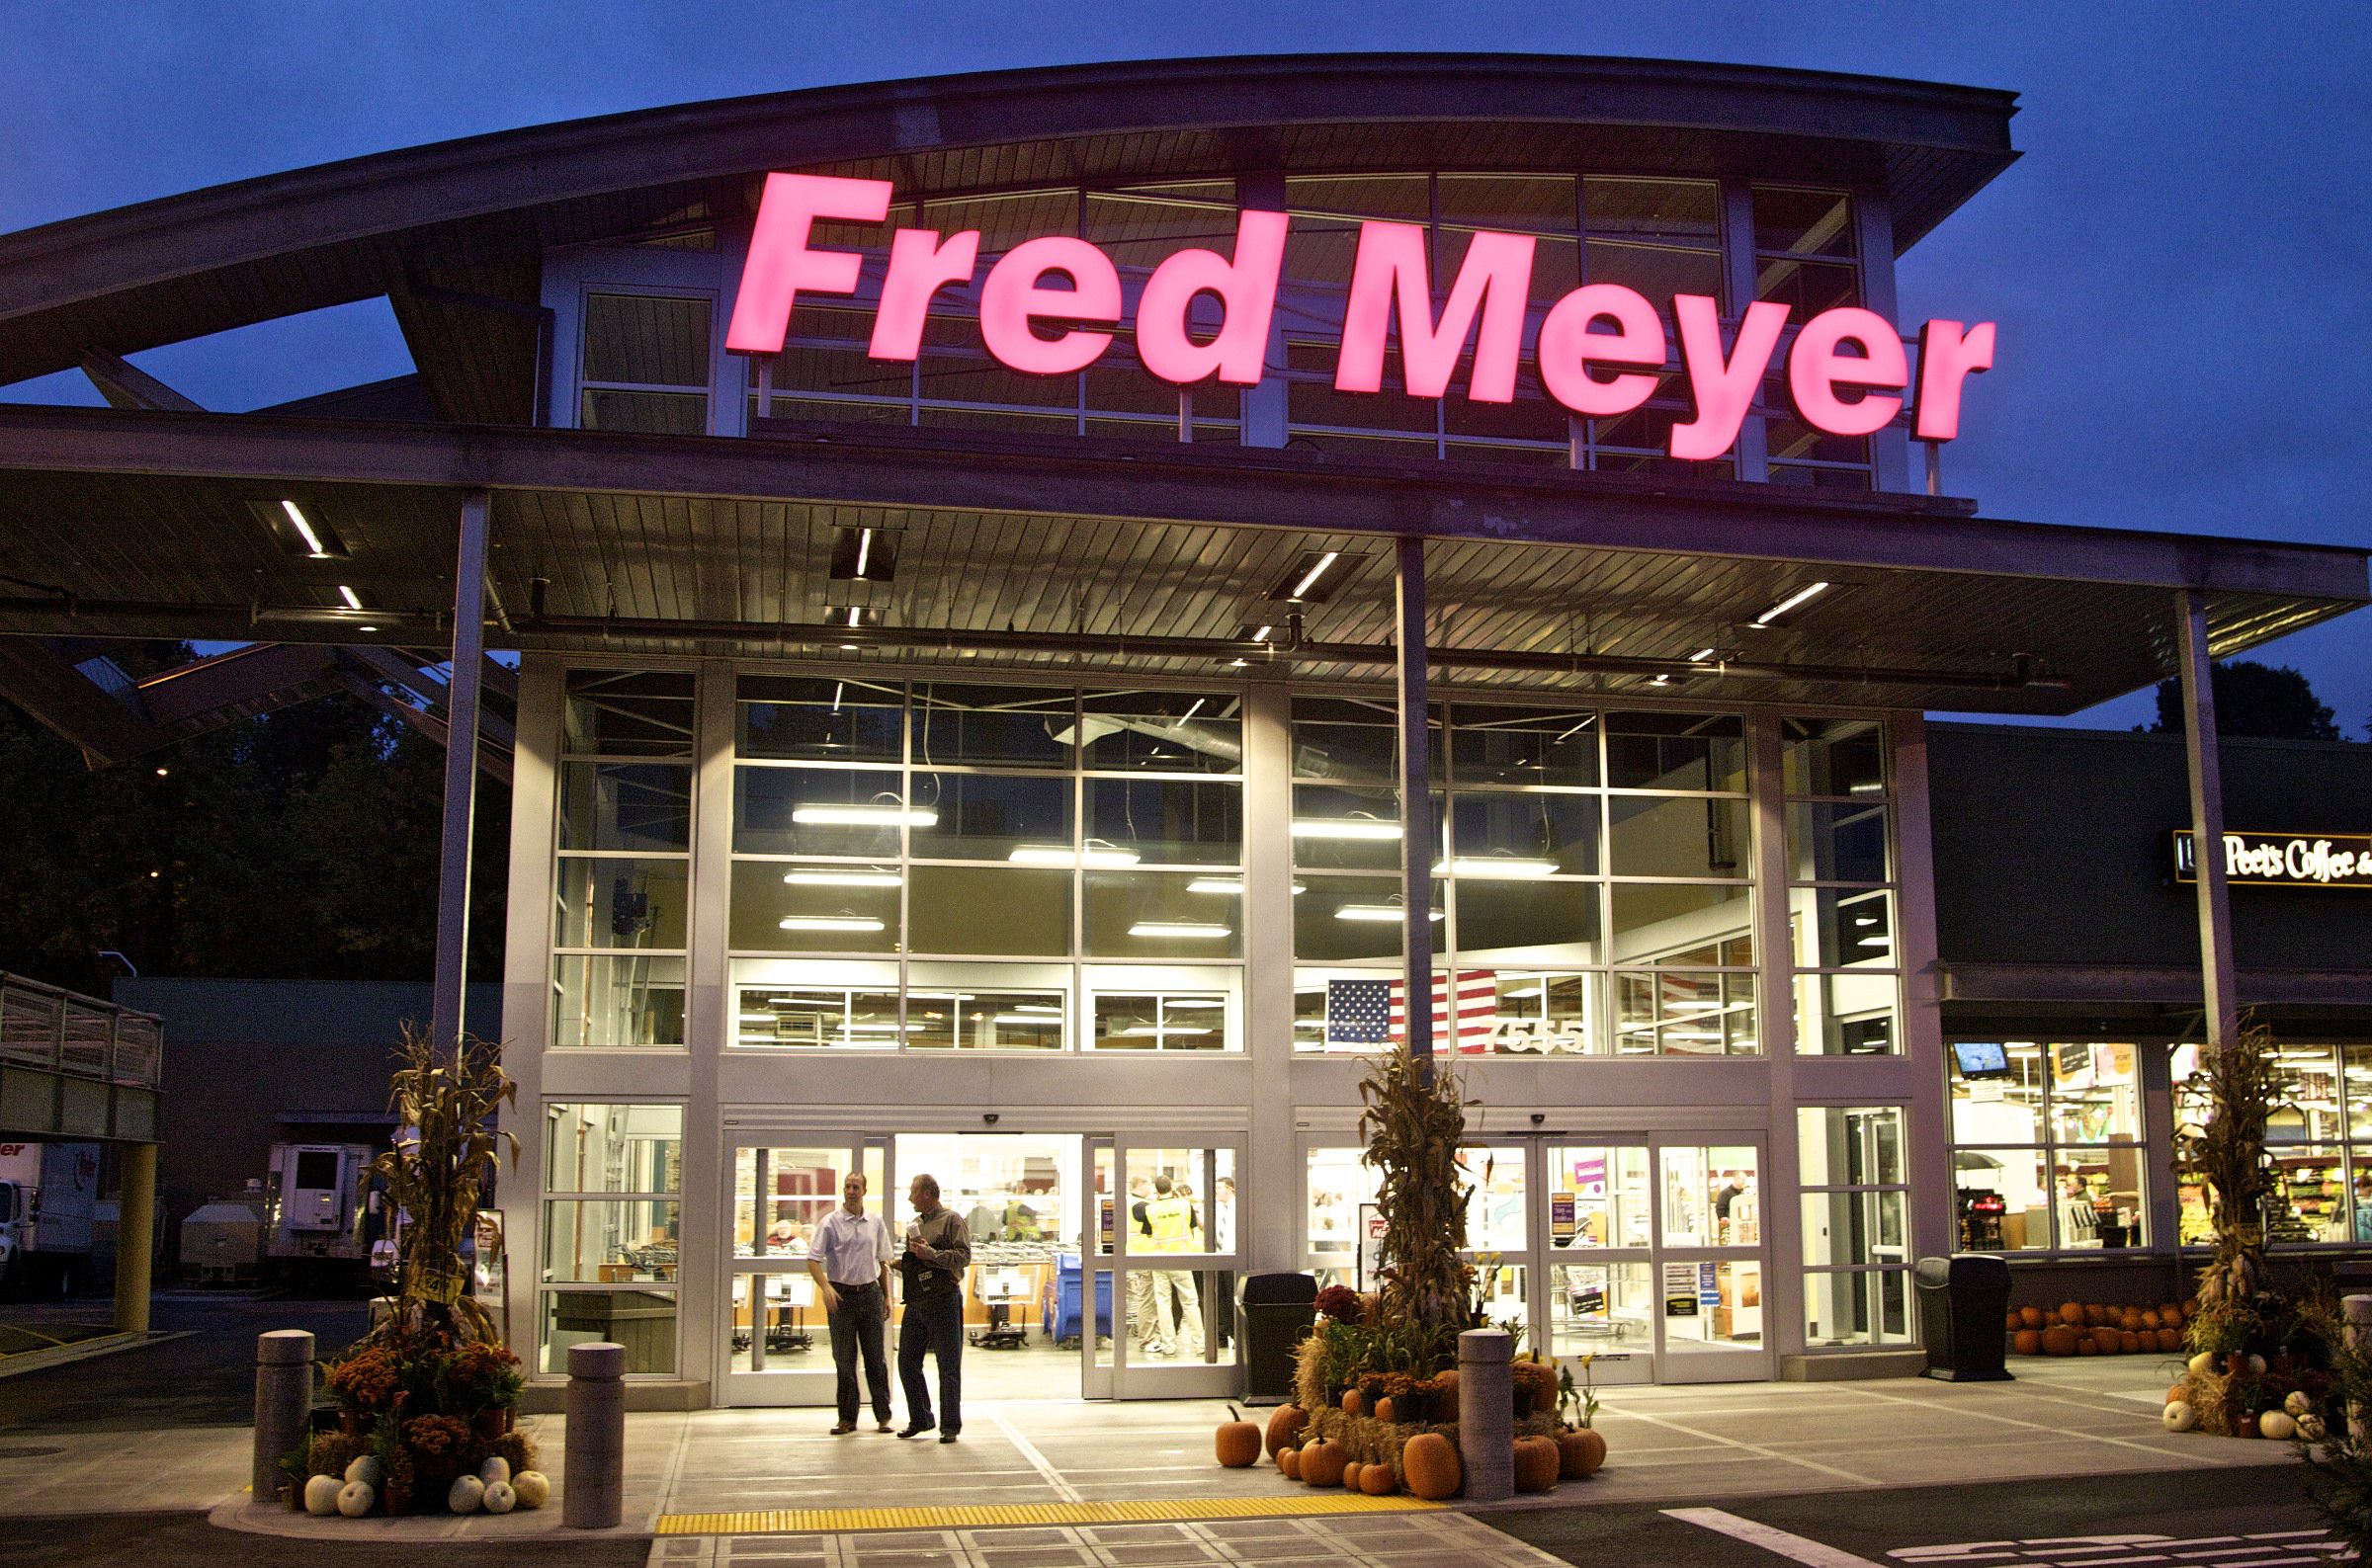 Owner of Fred Meyer aims to also own Safeway parent Albertsons in